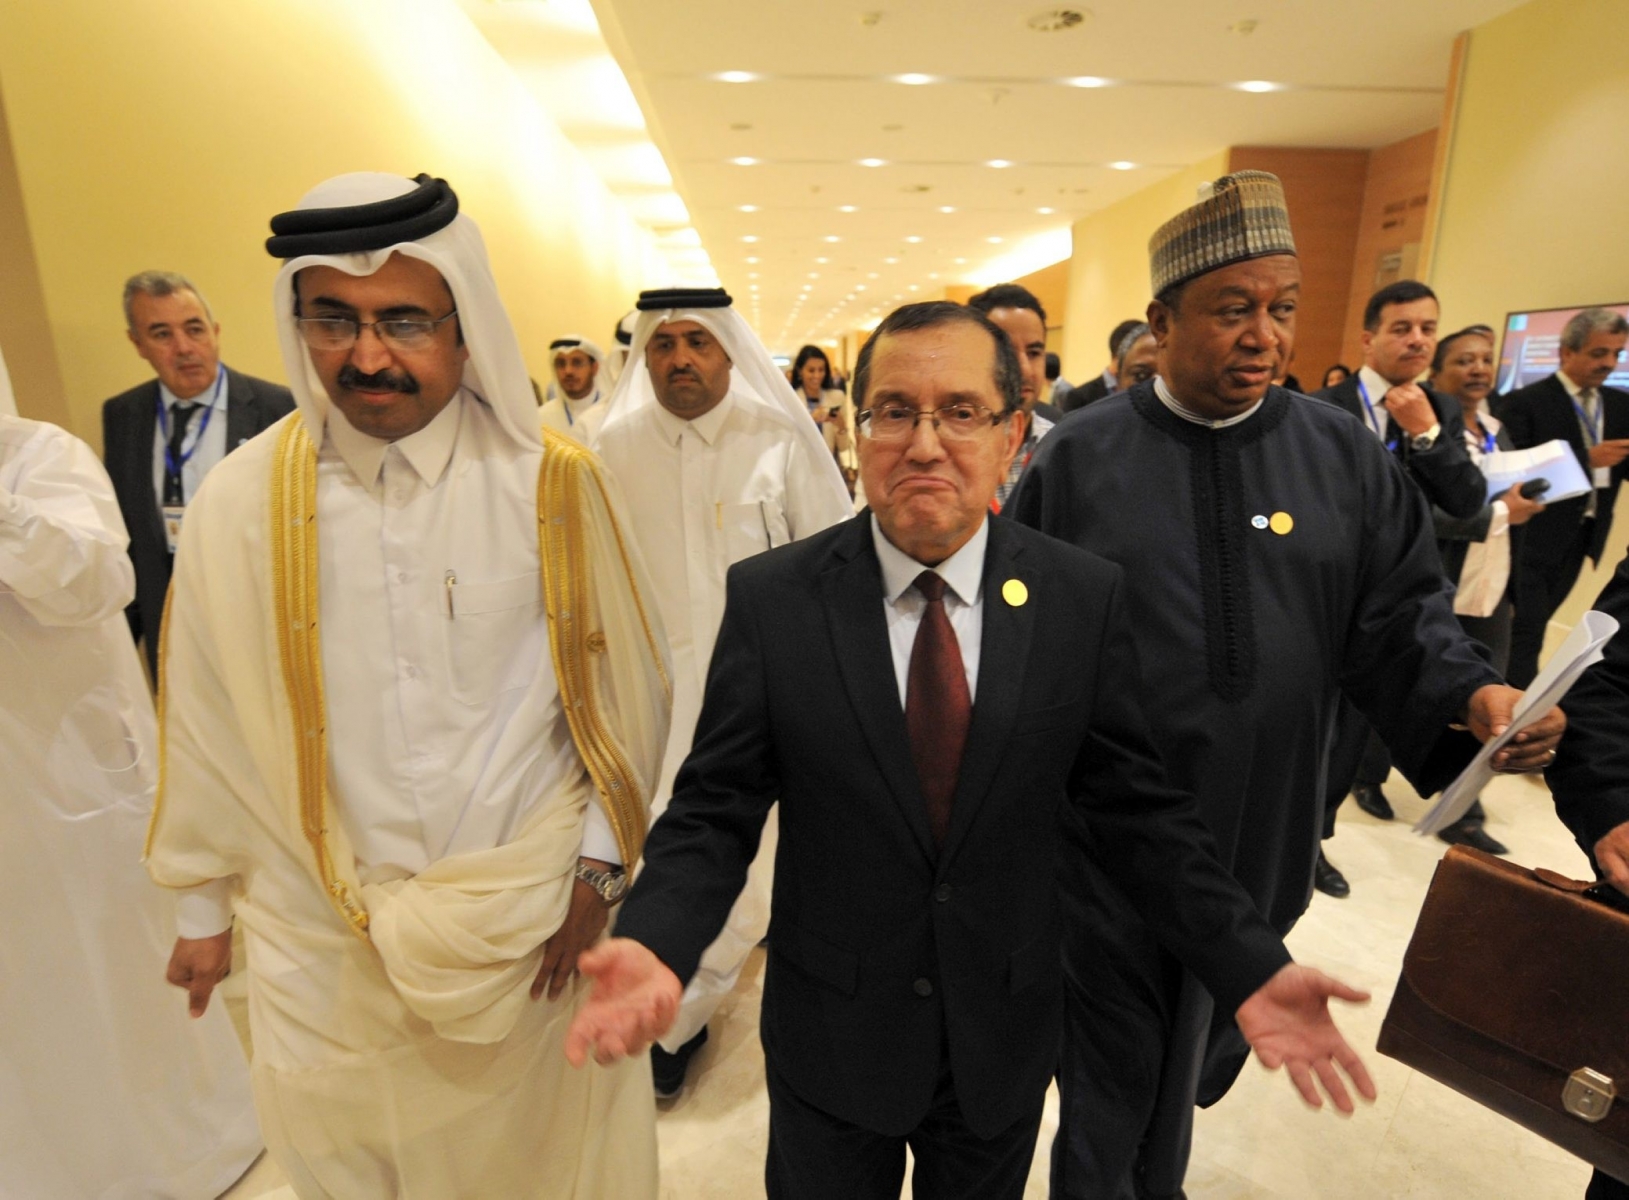 Is this photo dated Wednesday, Sept. 28, 2016, Algerian Energy Minister Noureddine Boutarfa, center, Bin Saleh Al-Sada, Minister of Energy and Industry of Qatar, left, and acting Secretary General of OPEC Mohammed Barkindo, right, leave the  International Conference Center after a  meeting of oil ministers of the Organization of the Petroleum Exporting countries, OPEC, in Algiers, Algeria. OPEC nations reached a preliminary agreement Wednesday to curb oil production for the first time since the global financial crisis eight years ago, in an effort to reduce a global glut of crude that has depressed oil prices for more than two years and weakened the economies of oil-producing nations. (AP Photo/Sidali Djarboub) APTOPIX Algeria Oil Prices